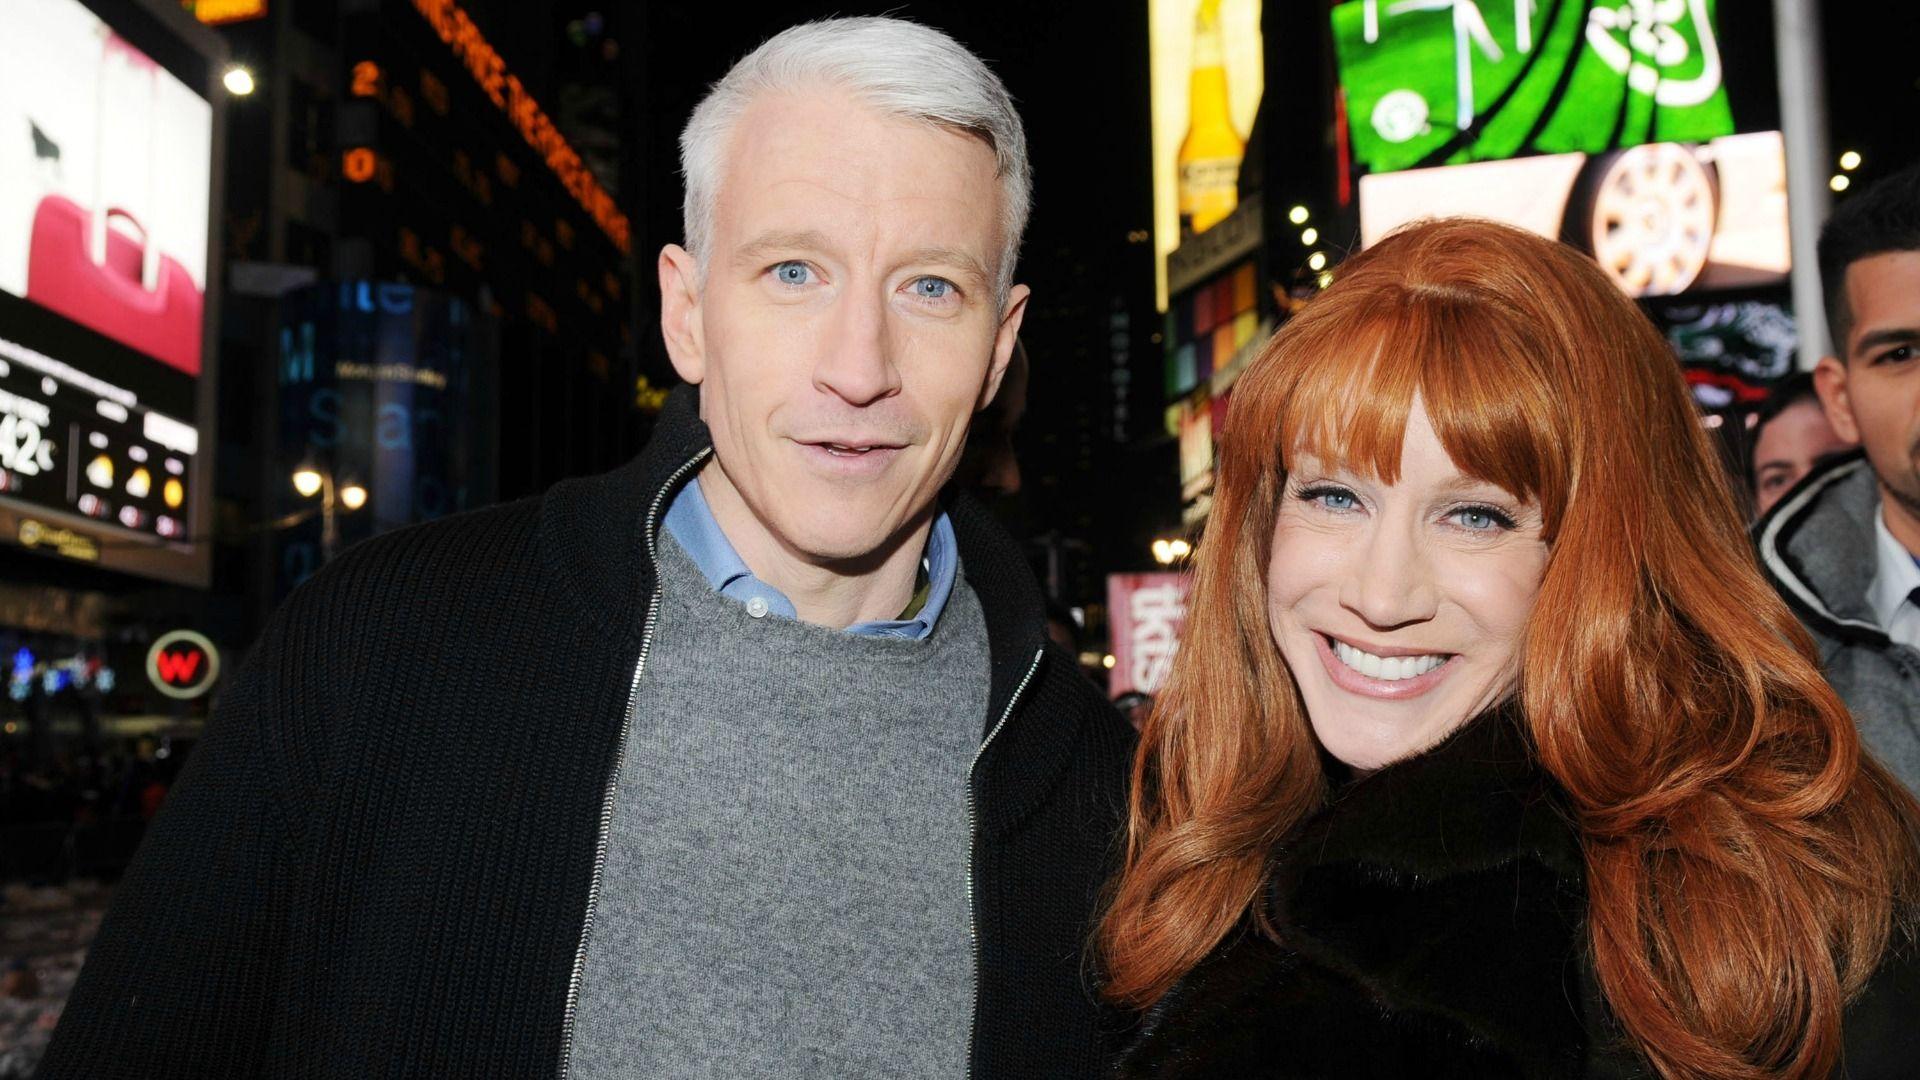 Anderson Cooper and Andy Cohen have a fight over Kathy Griffin (VIDEO)